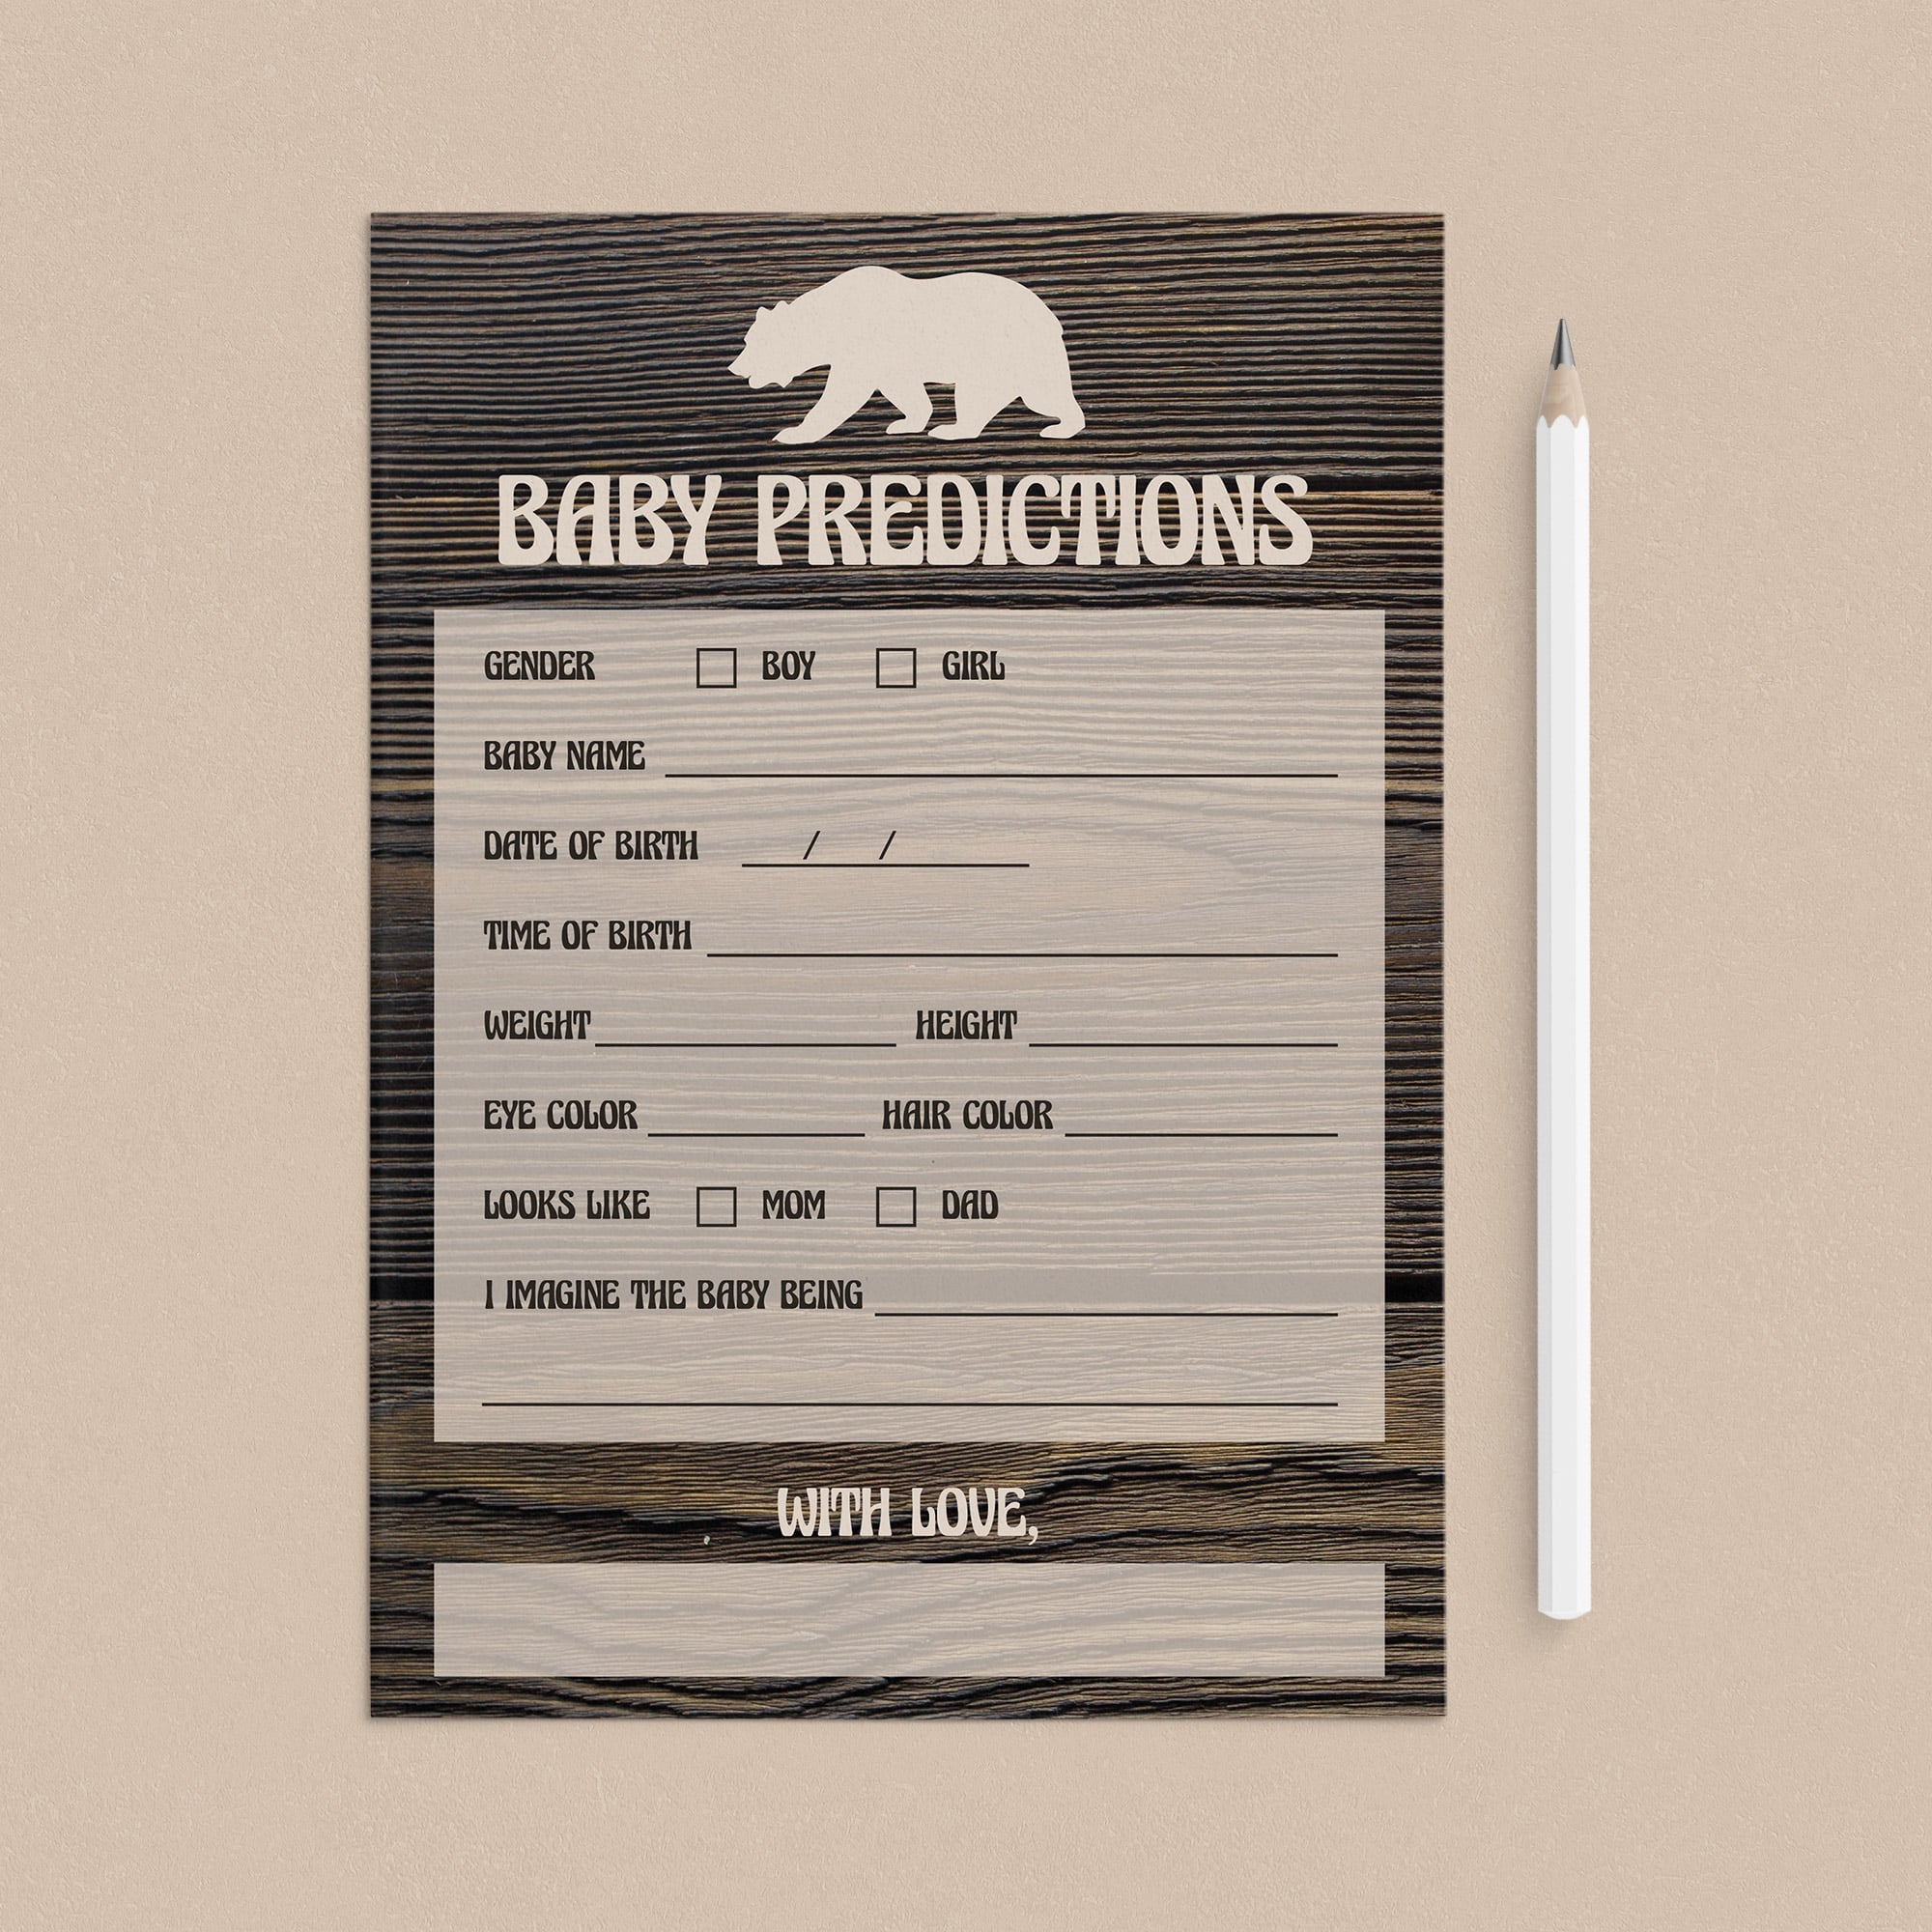 Printable baby predictions for boy shower by LittleSizzle